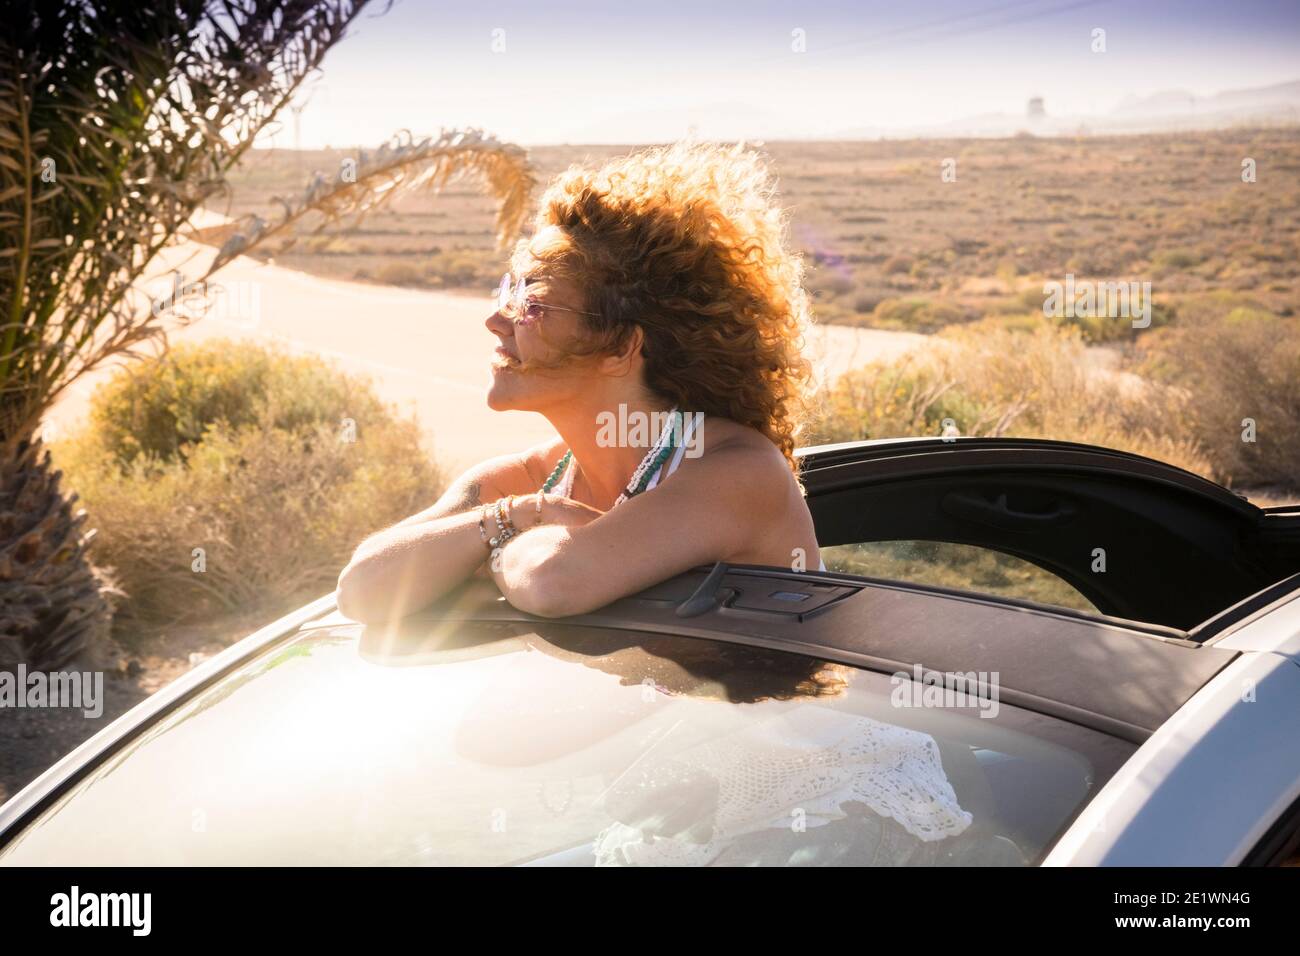 Cheerful woman smile and enjoy freedom traveling outside a convertible car under the summer sun - holiday vacation lifestyle concept for beautiful you Stock Photo